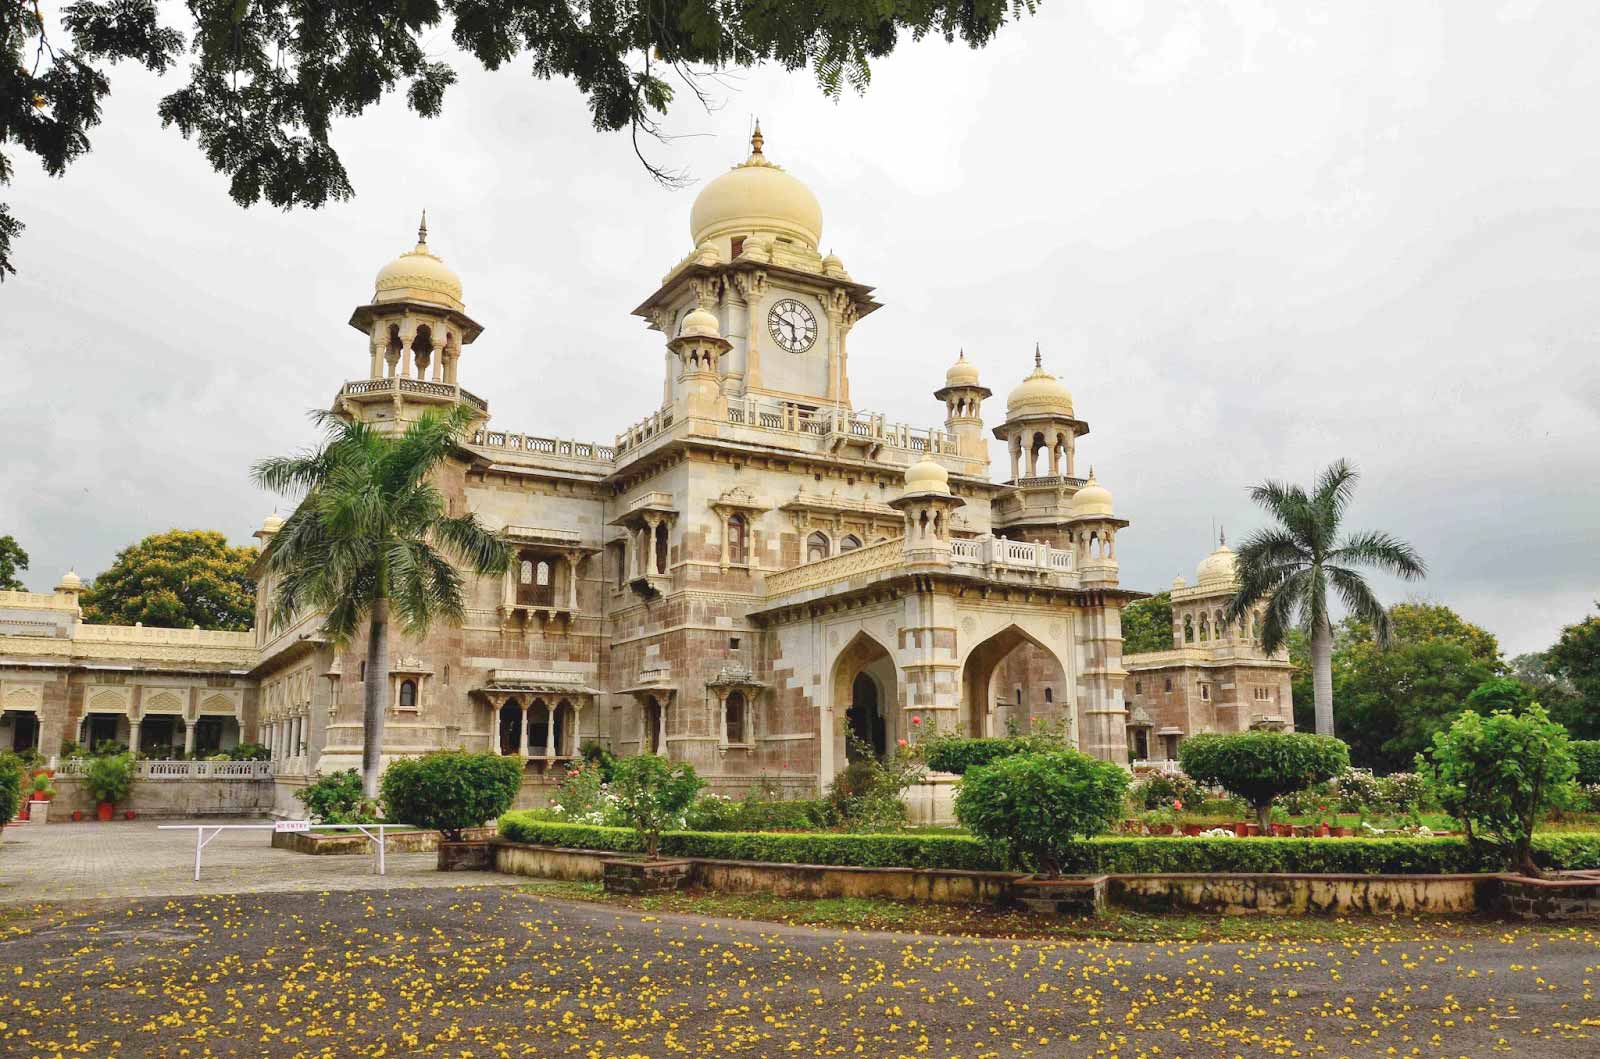 Indore tours from Pune and Mumbai